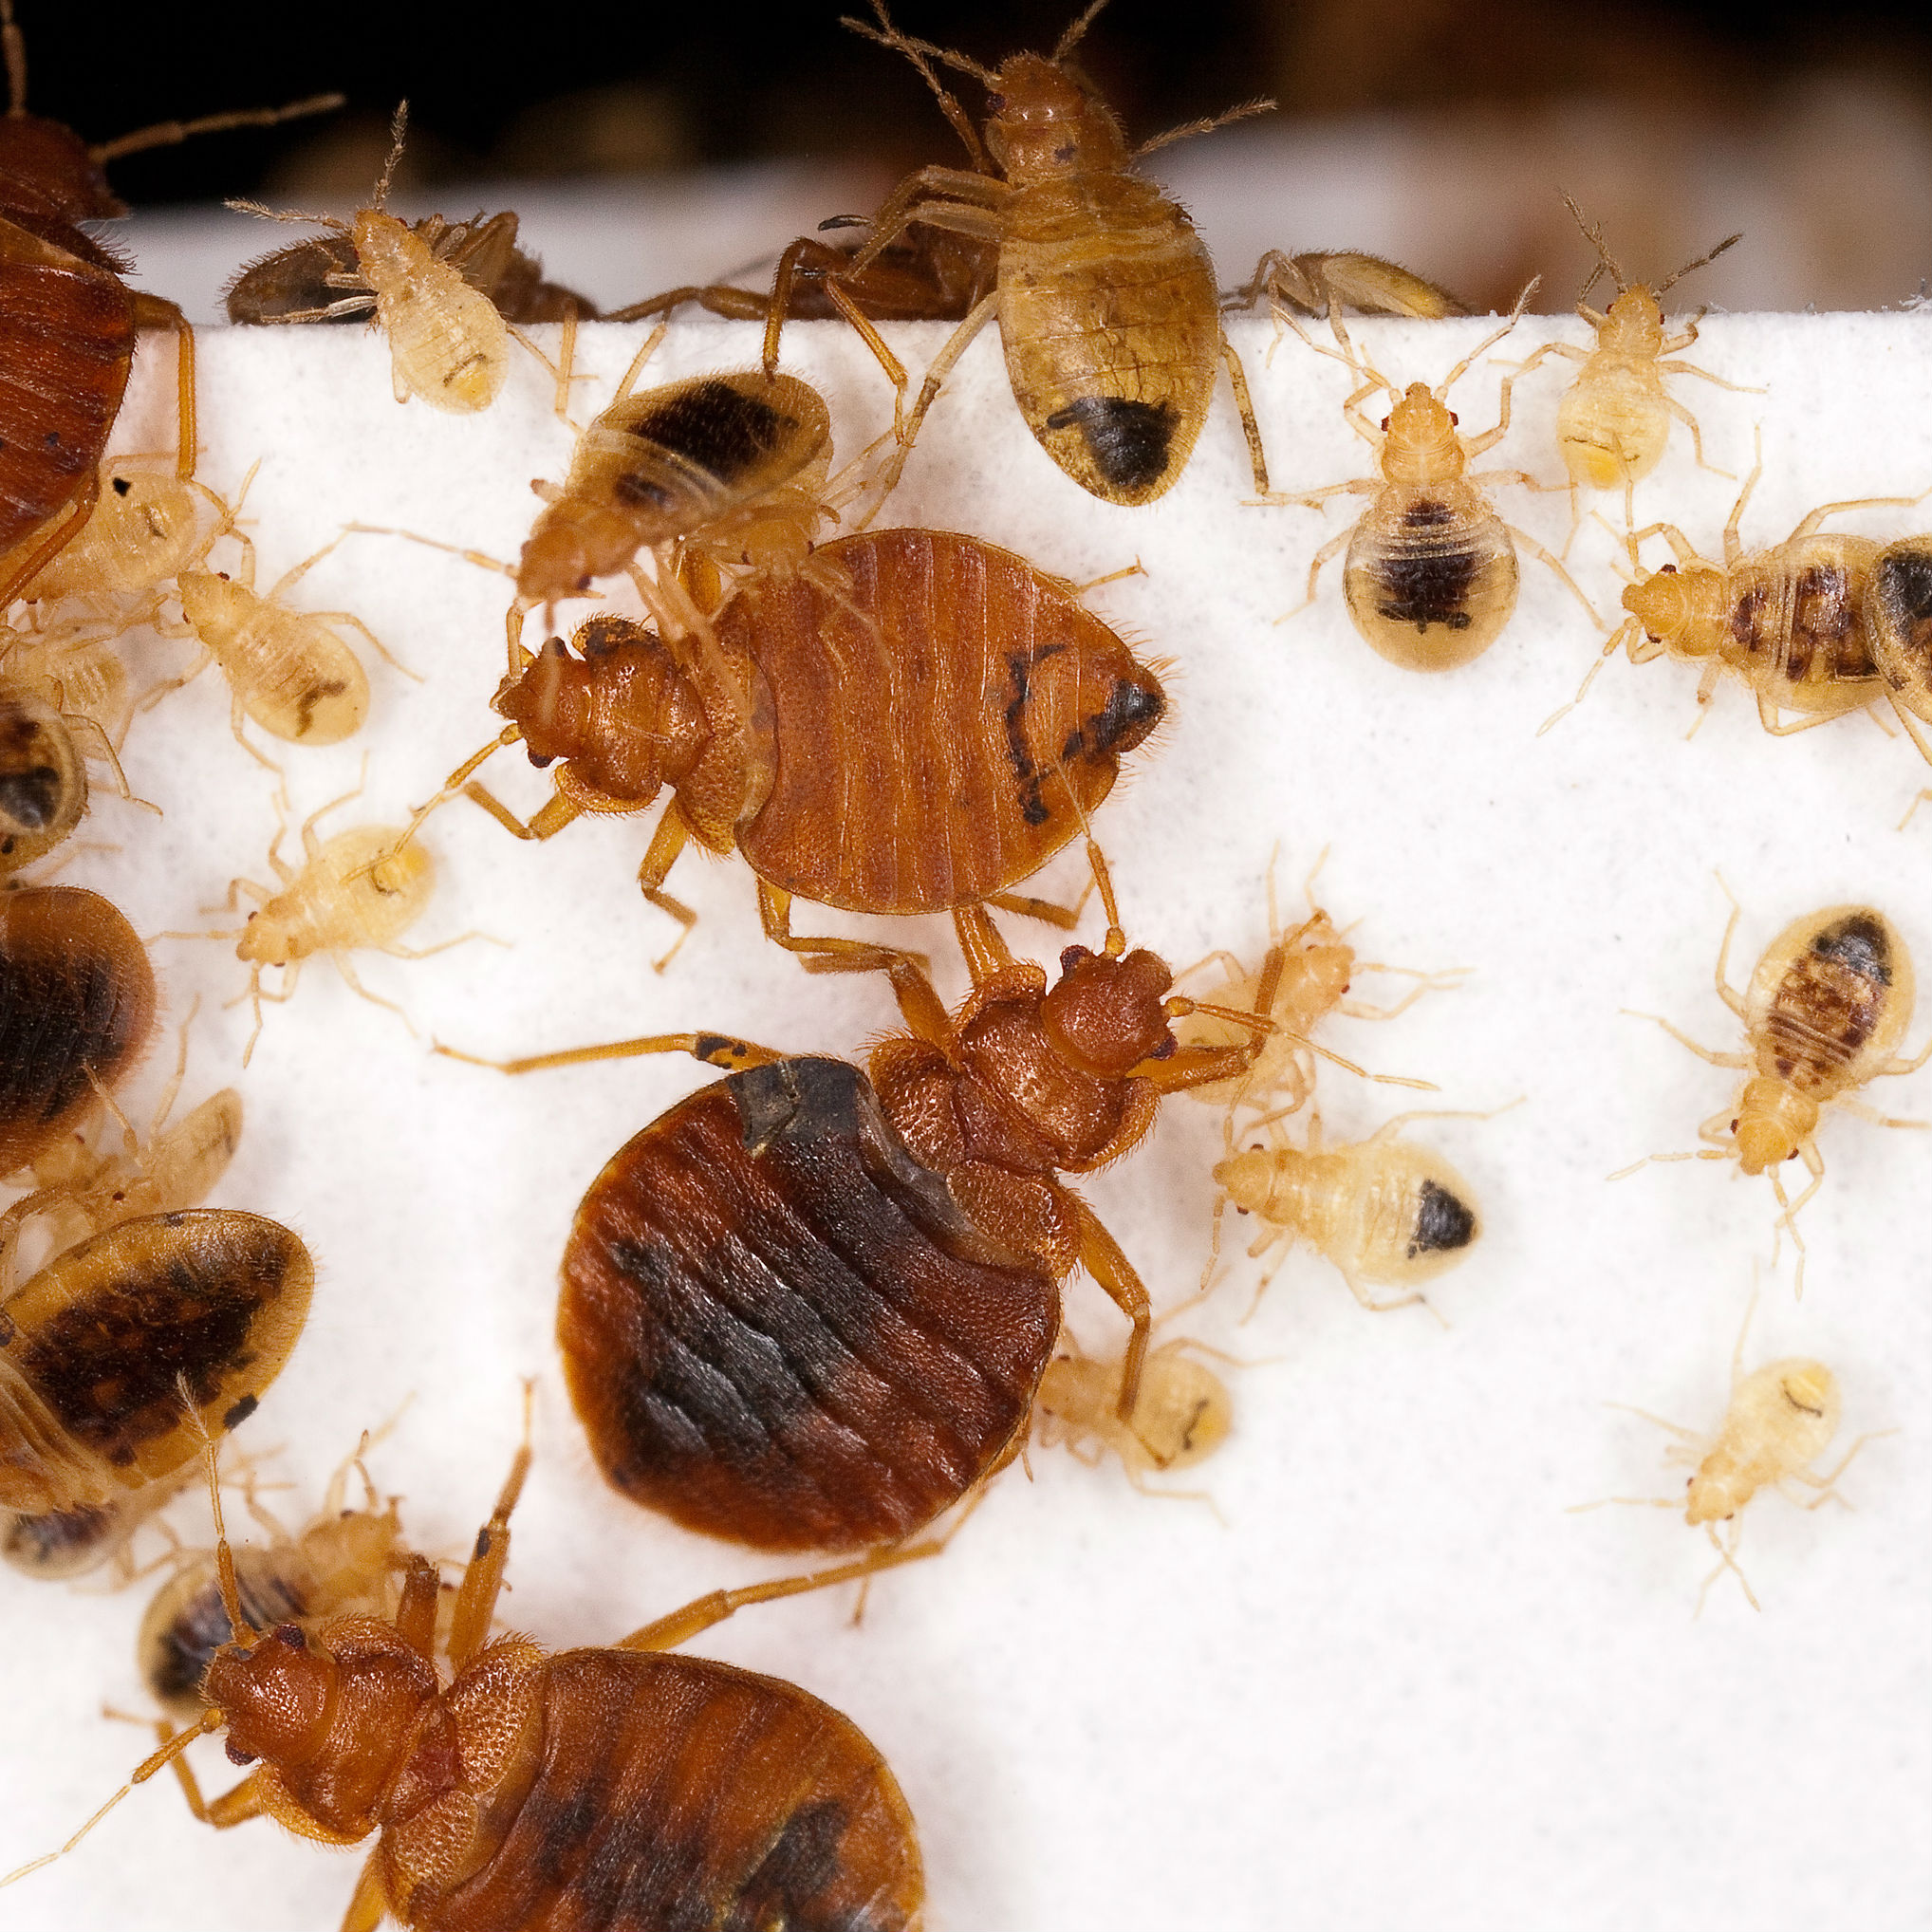 Bed Bugs extermination or removal services in kitchener,guelph,waterloo,brantford,cambridge